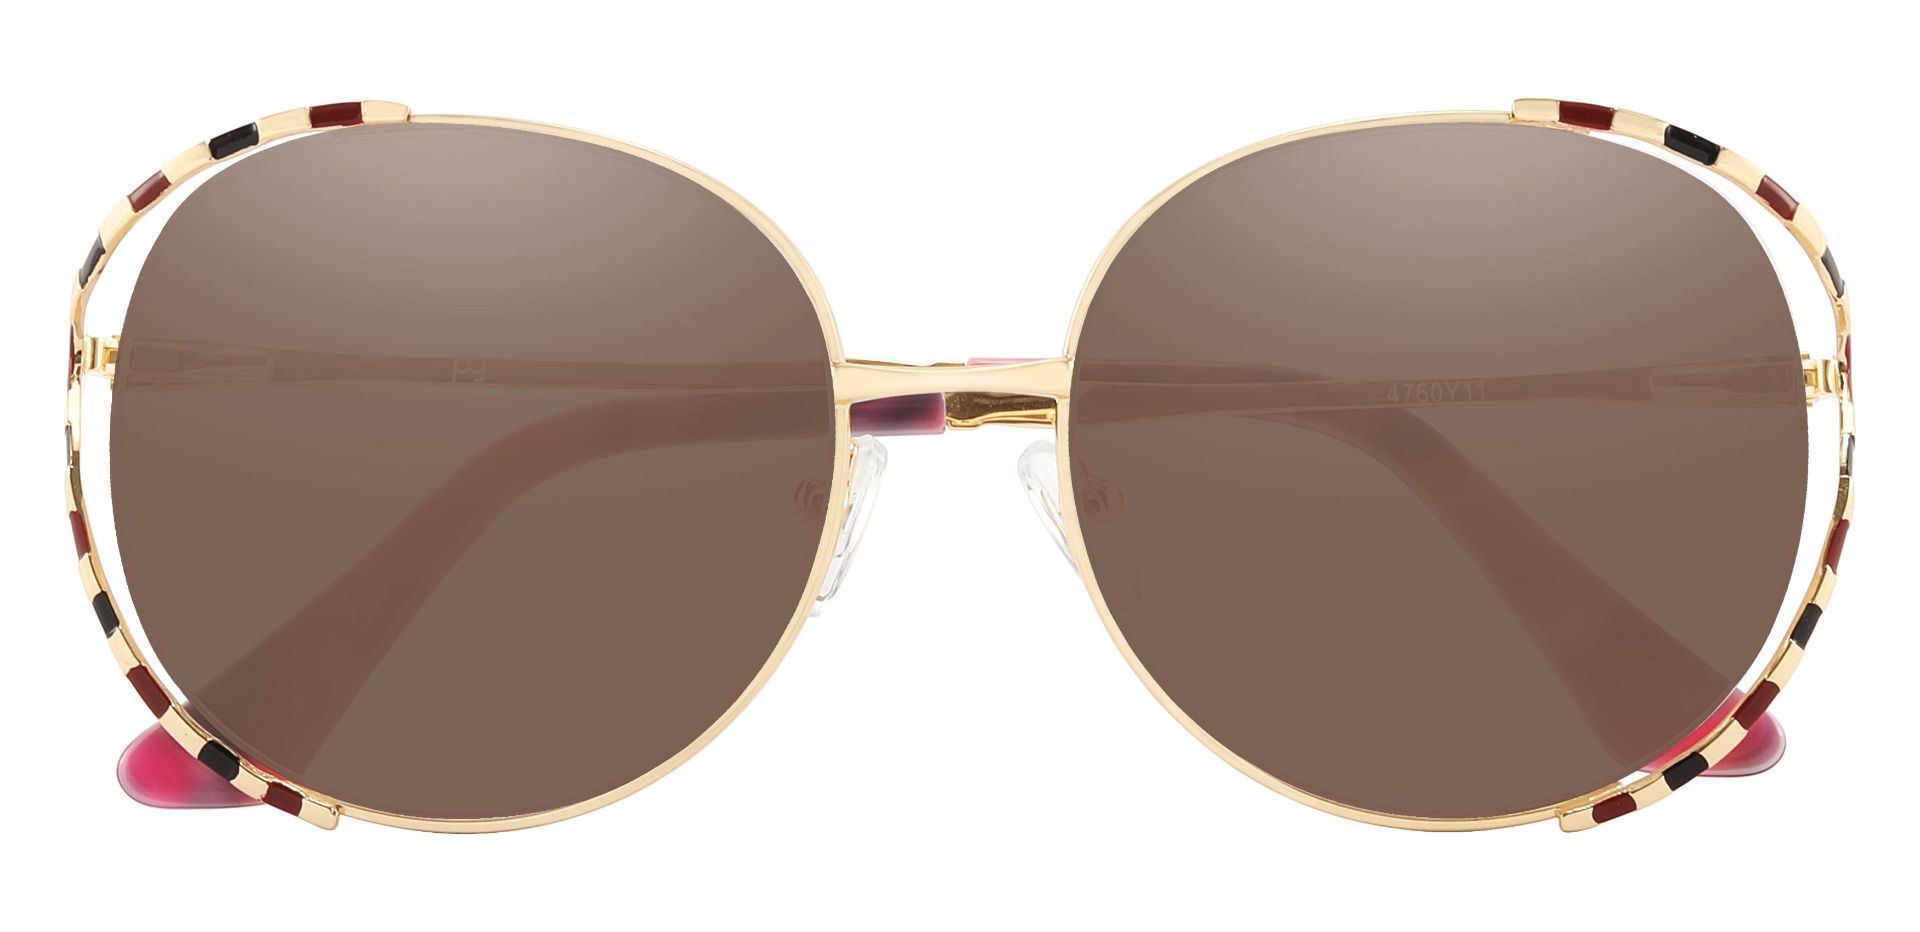 Dorothy Oval Prescription Sunglasses - Pink Frame With Brown Lenses